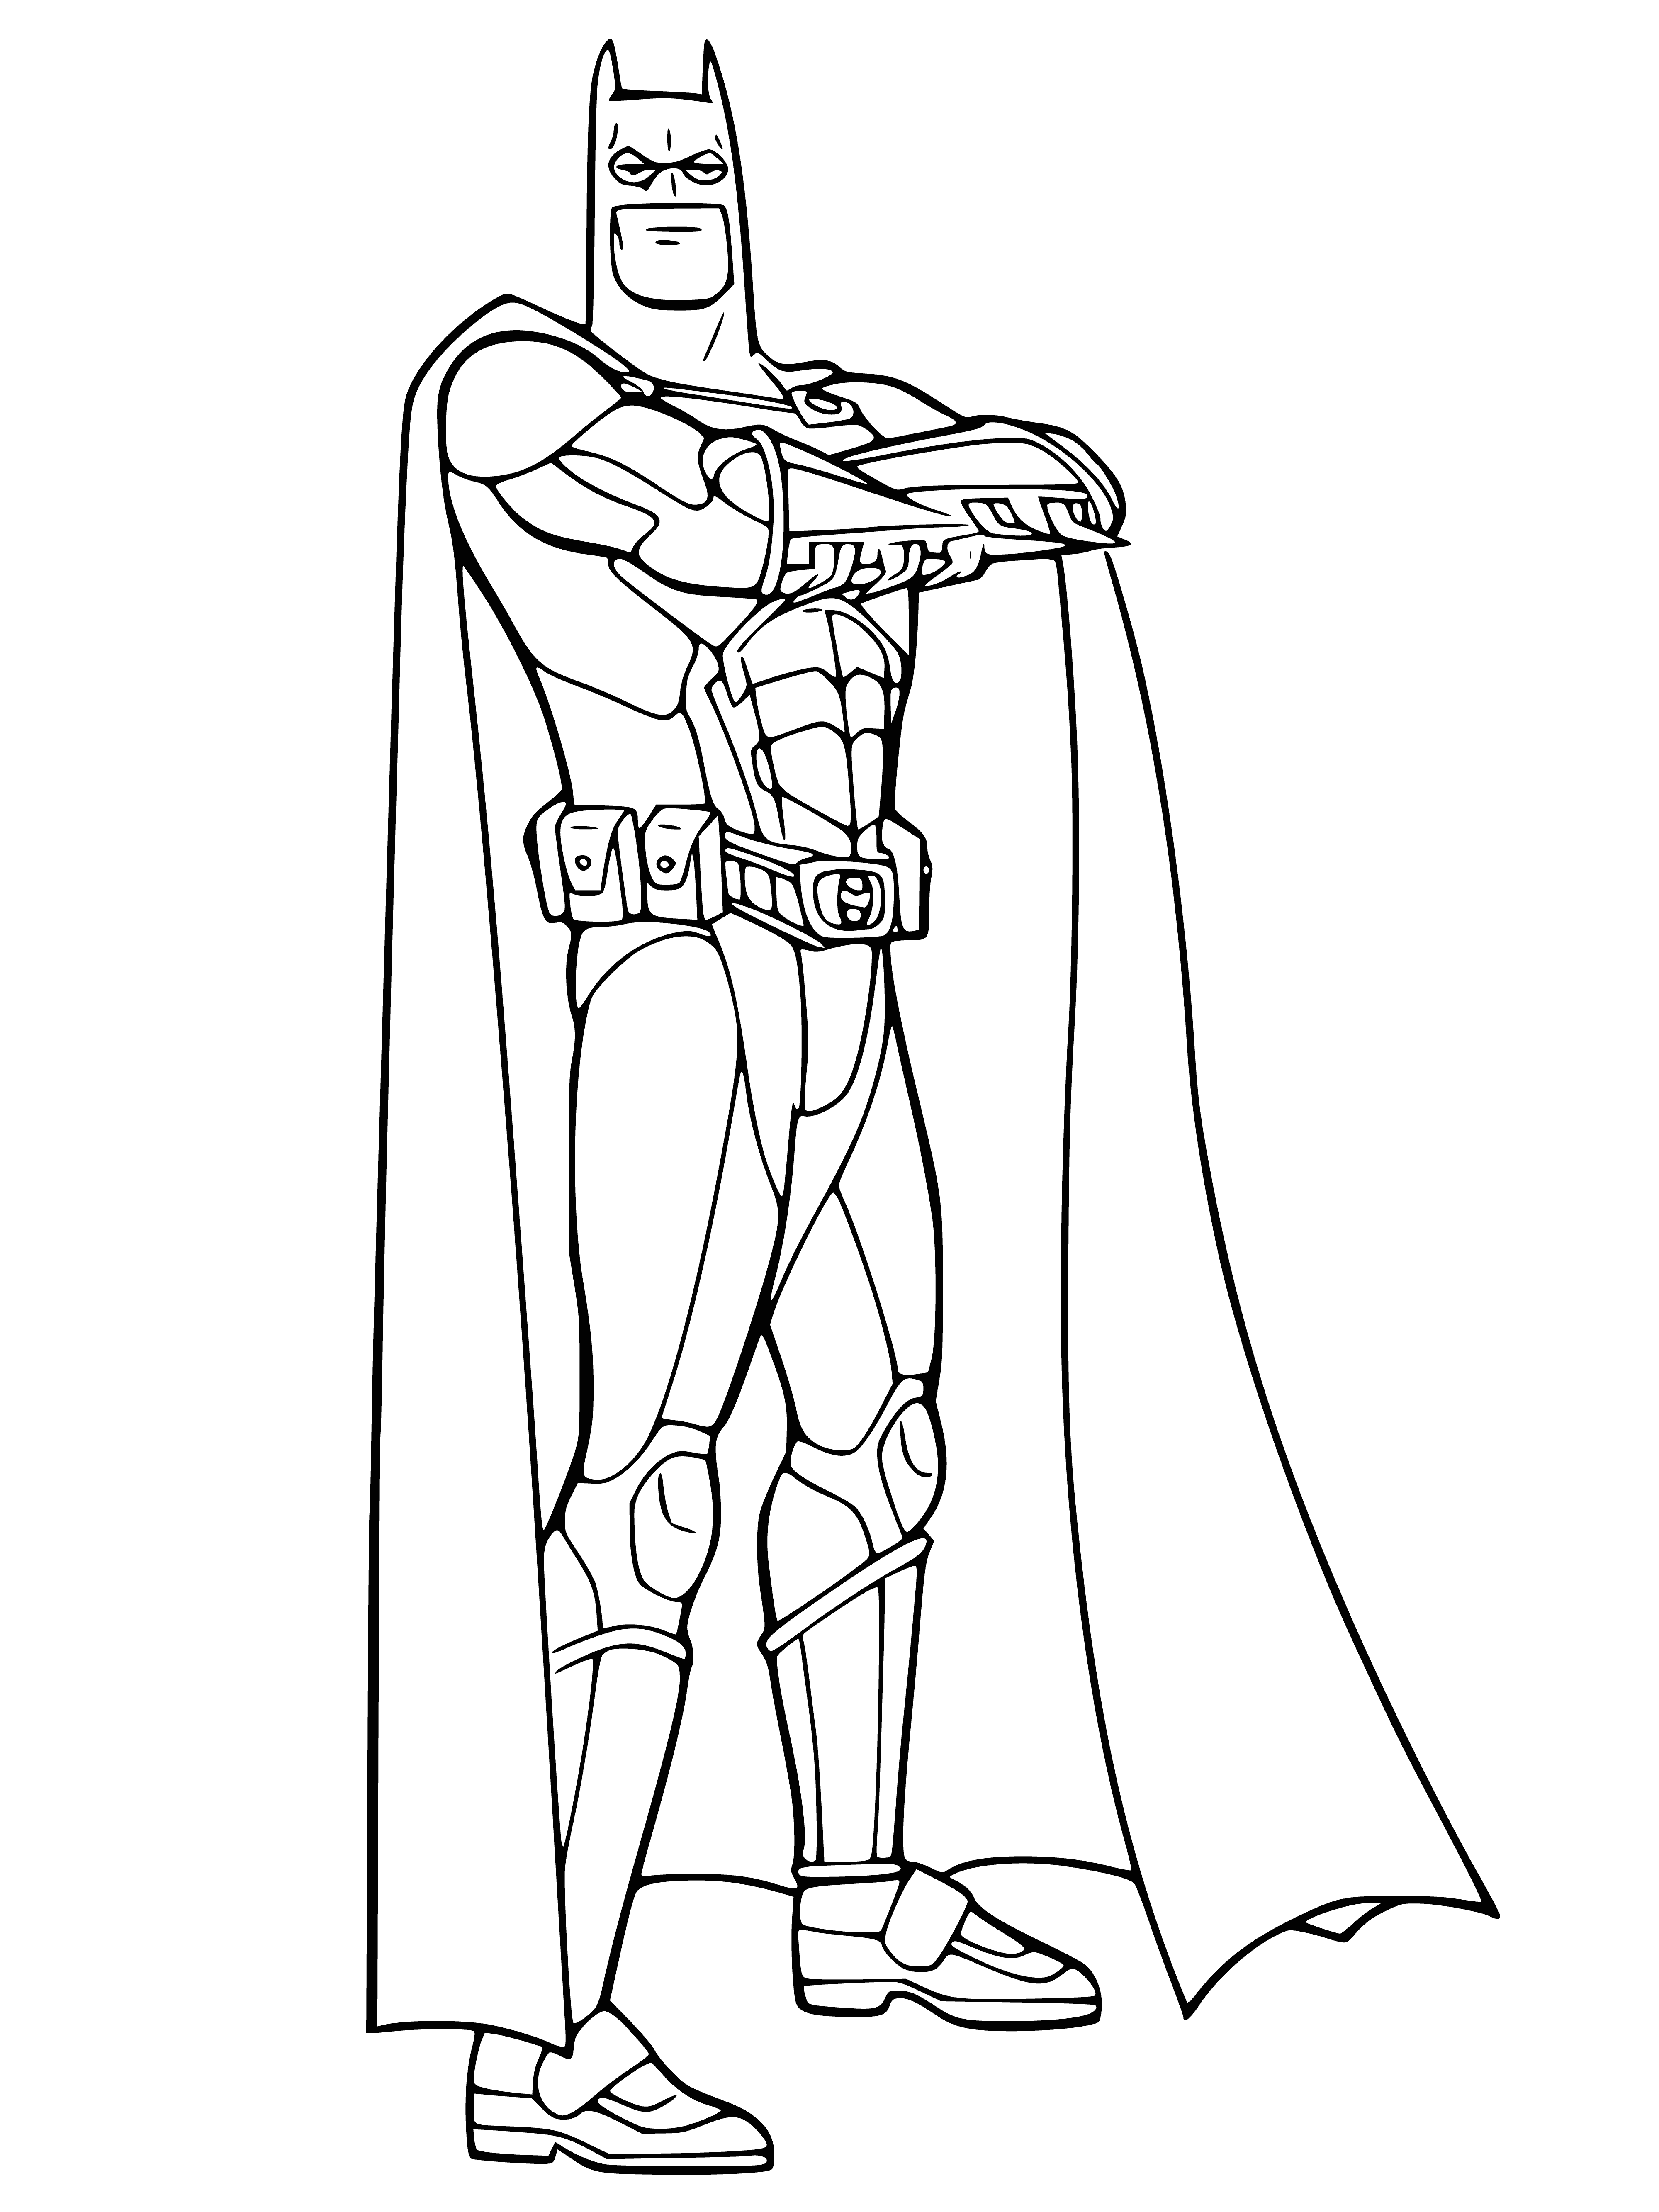 coloring page: Batman stands tall on a rooftop, cape billowing in the wind, a guardian of the night, confident and strong. #JusticeLeague